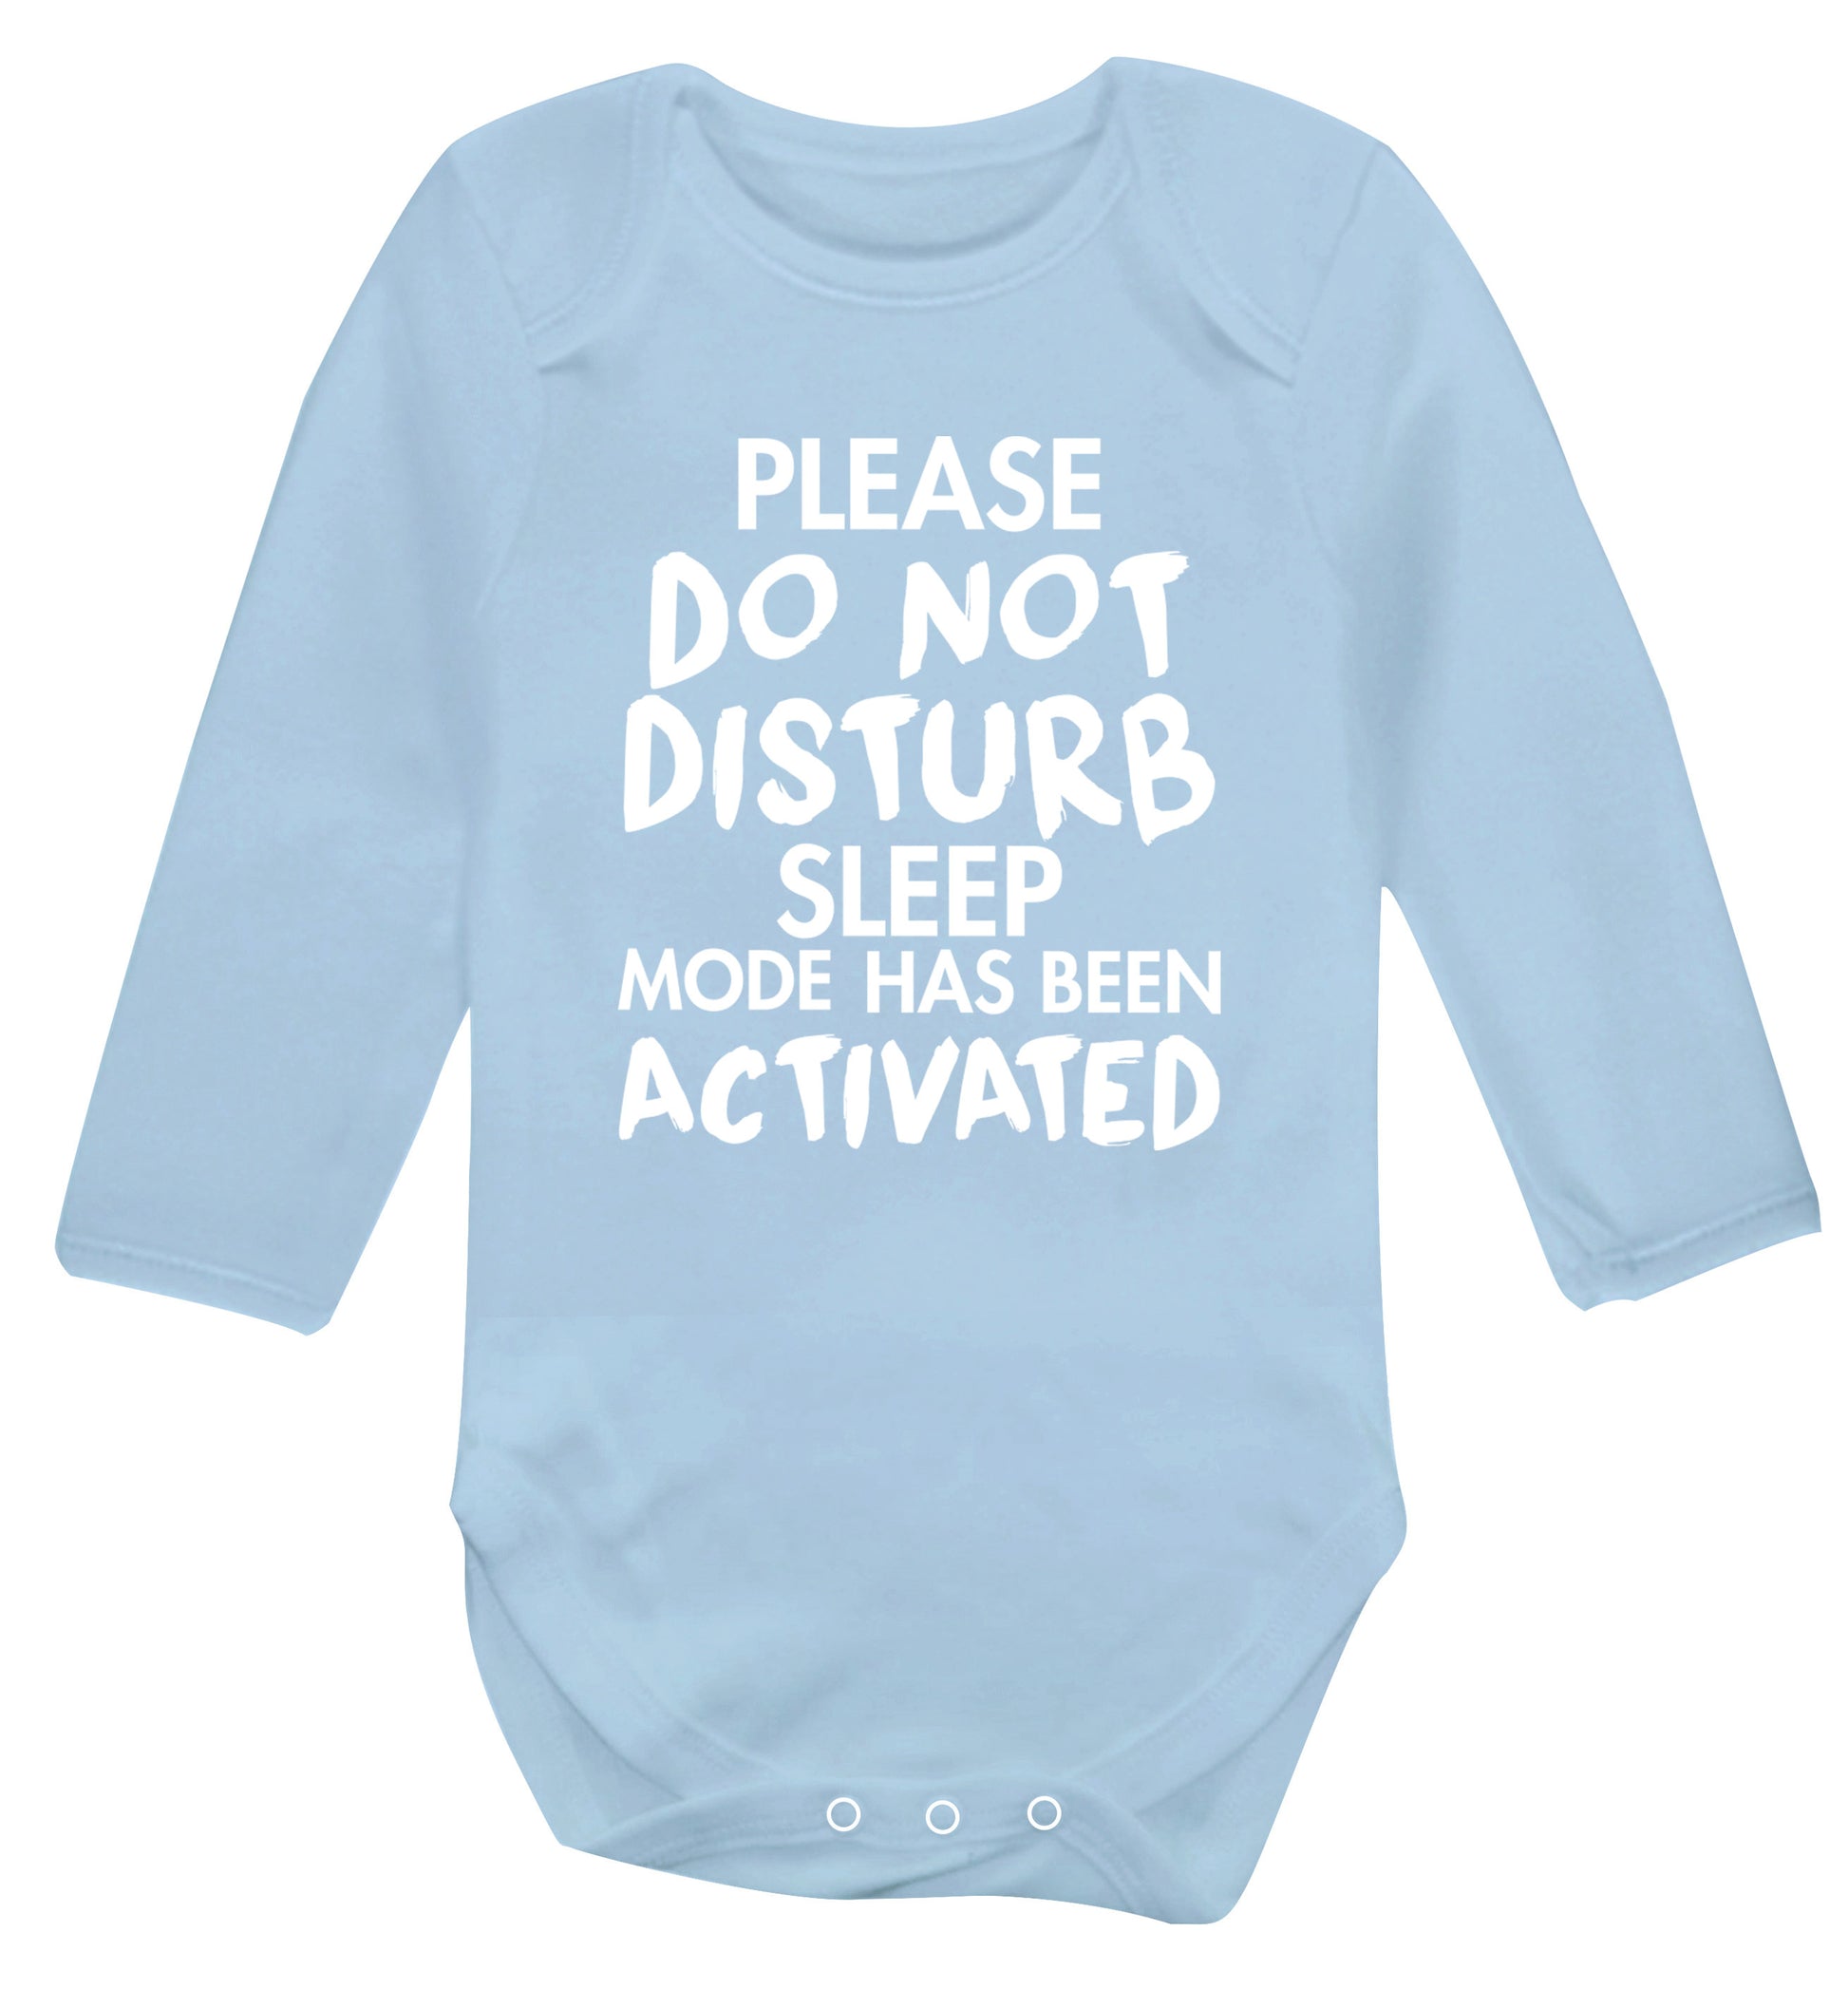 Please do not disturb sleeping mode has been activated Baby Vest long sleeved pale blue 6-12 months